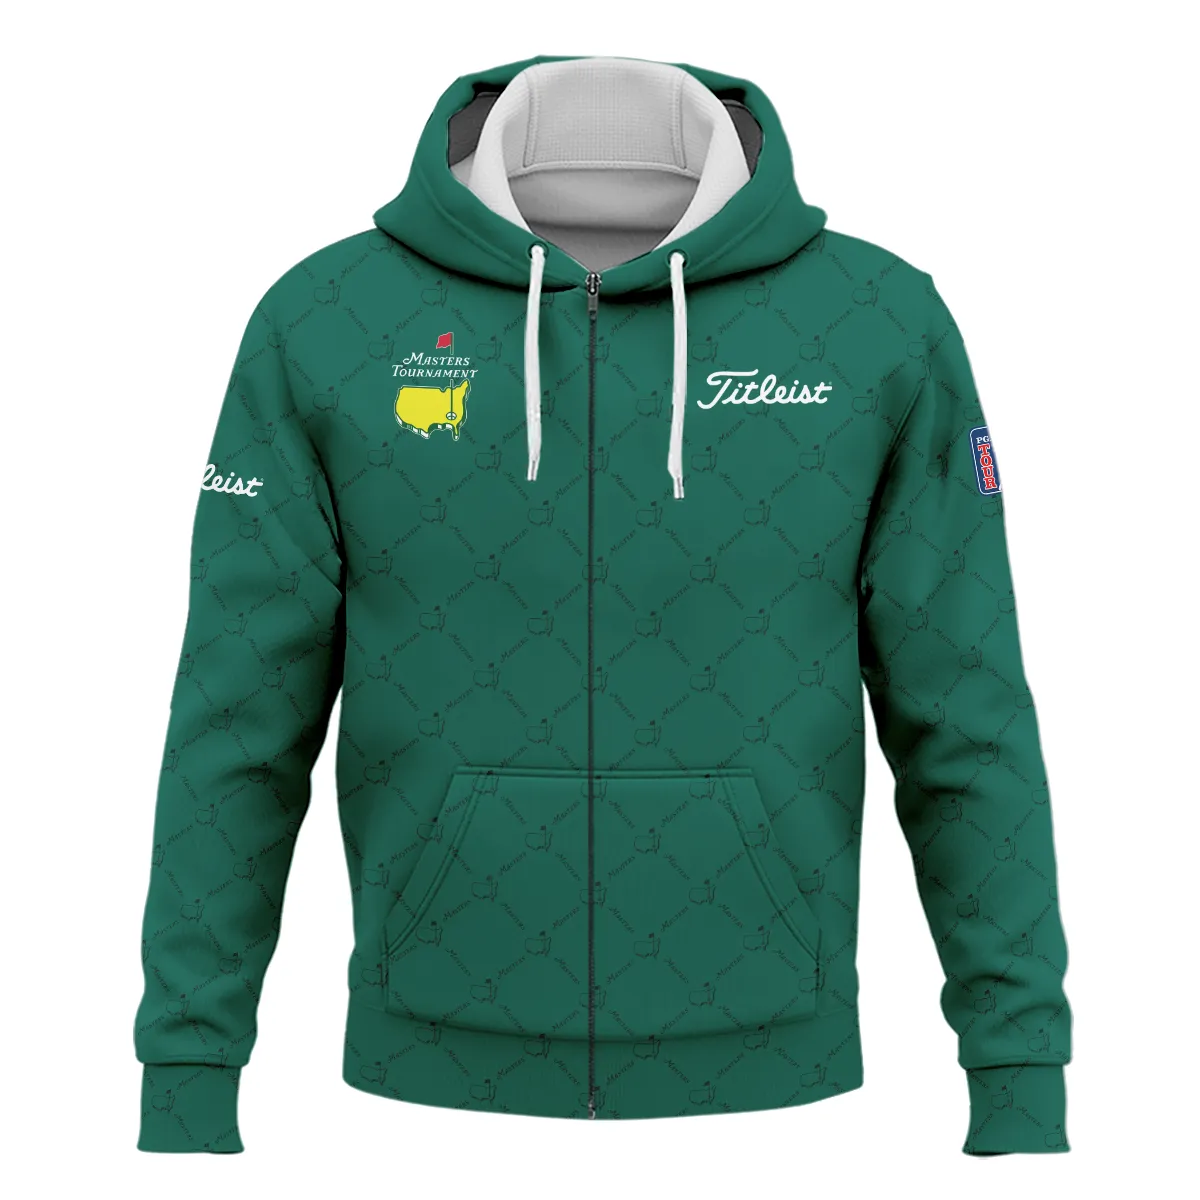 Golf Sport Pattern Color Green Mix Black Masters Tournament Titleist Hoodie Shirt Style Classic